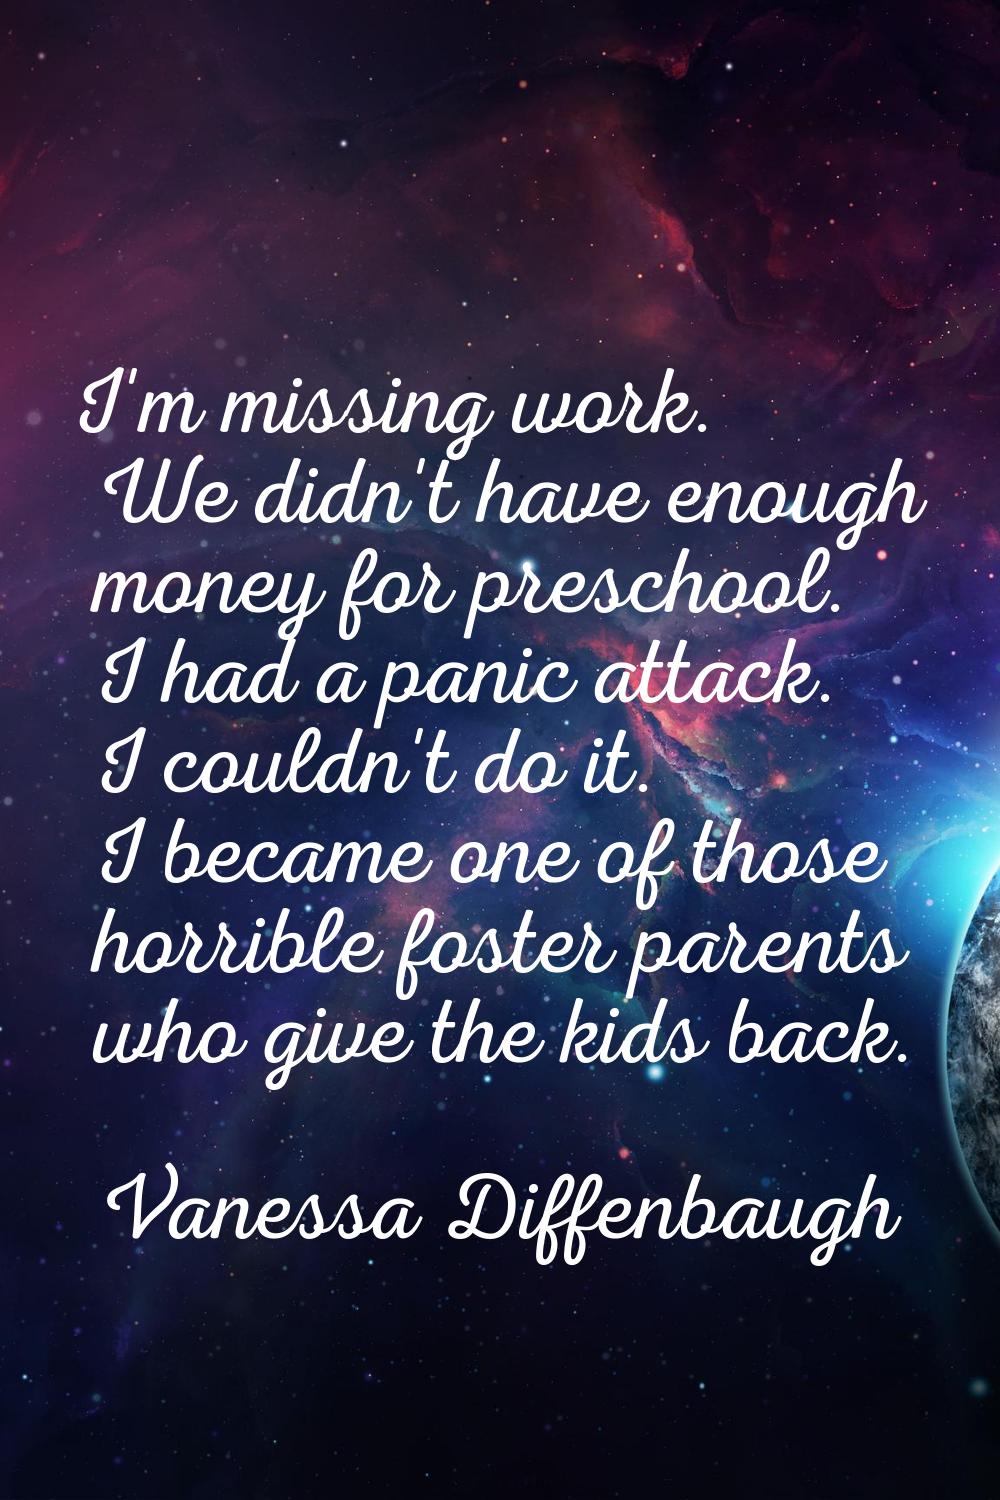 I'm missing work. We didn't have enough money for preschool. I had a panic attack. I couldn't do it